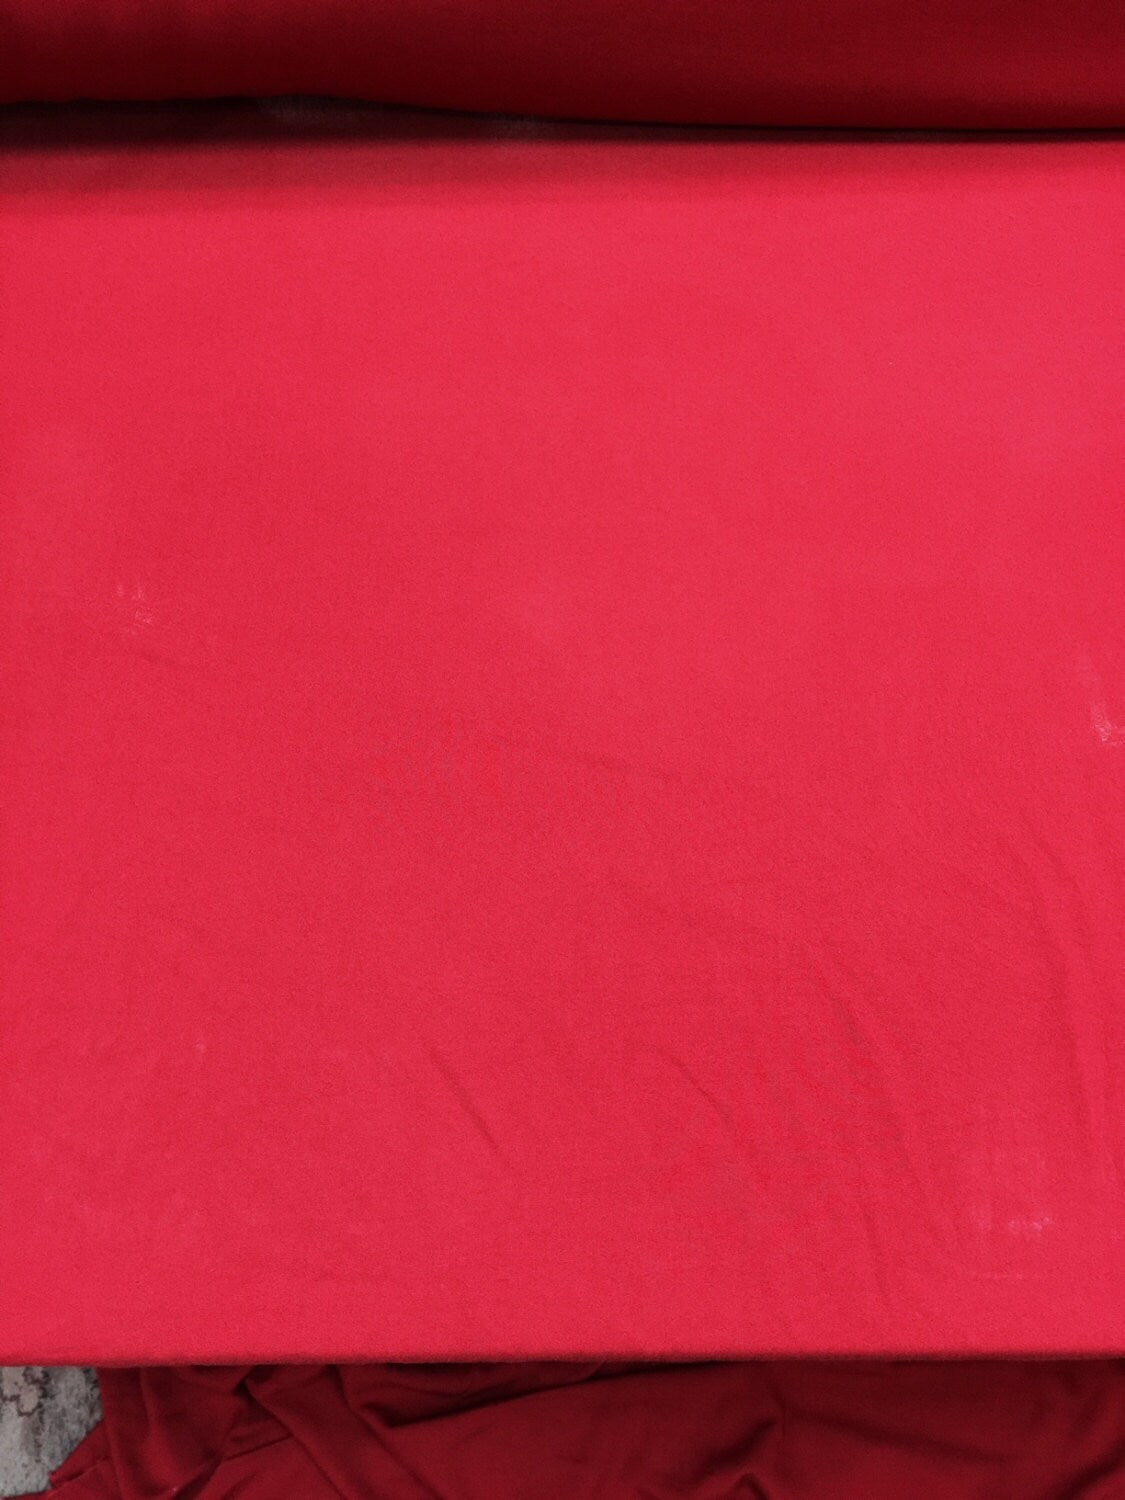 Rayon challis red Vampire's kiss red 60"w soft flowy organic fabric kids dress draping clothing decoration fabric sold by the yard